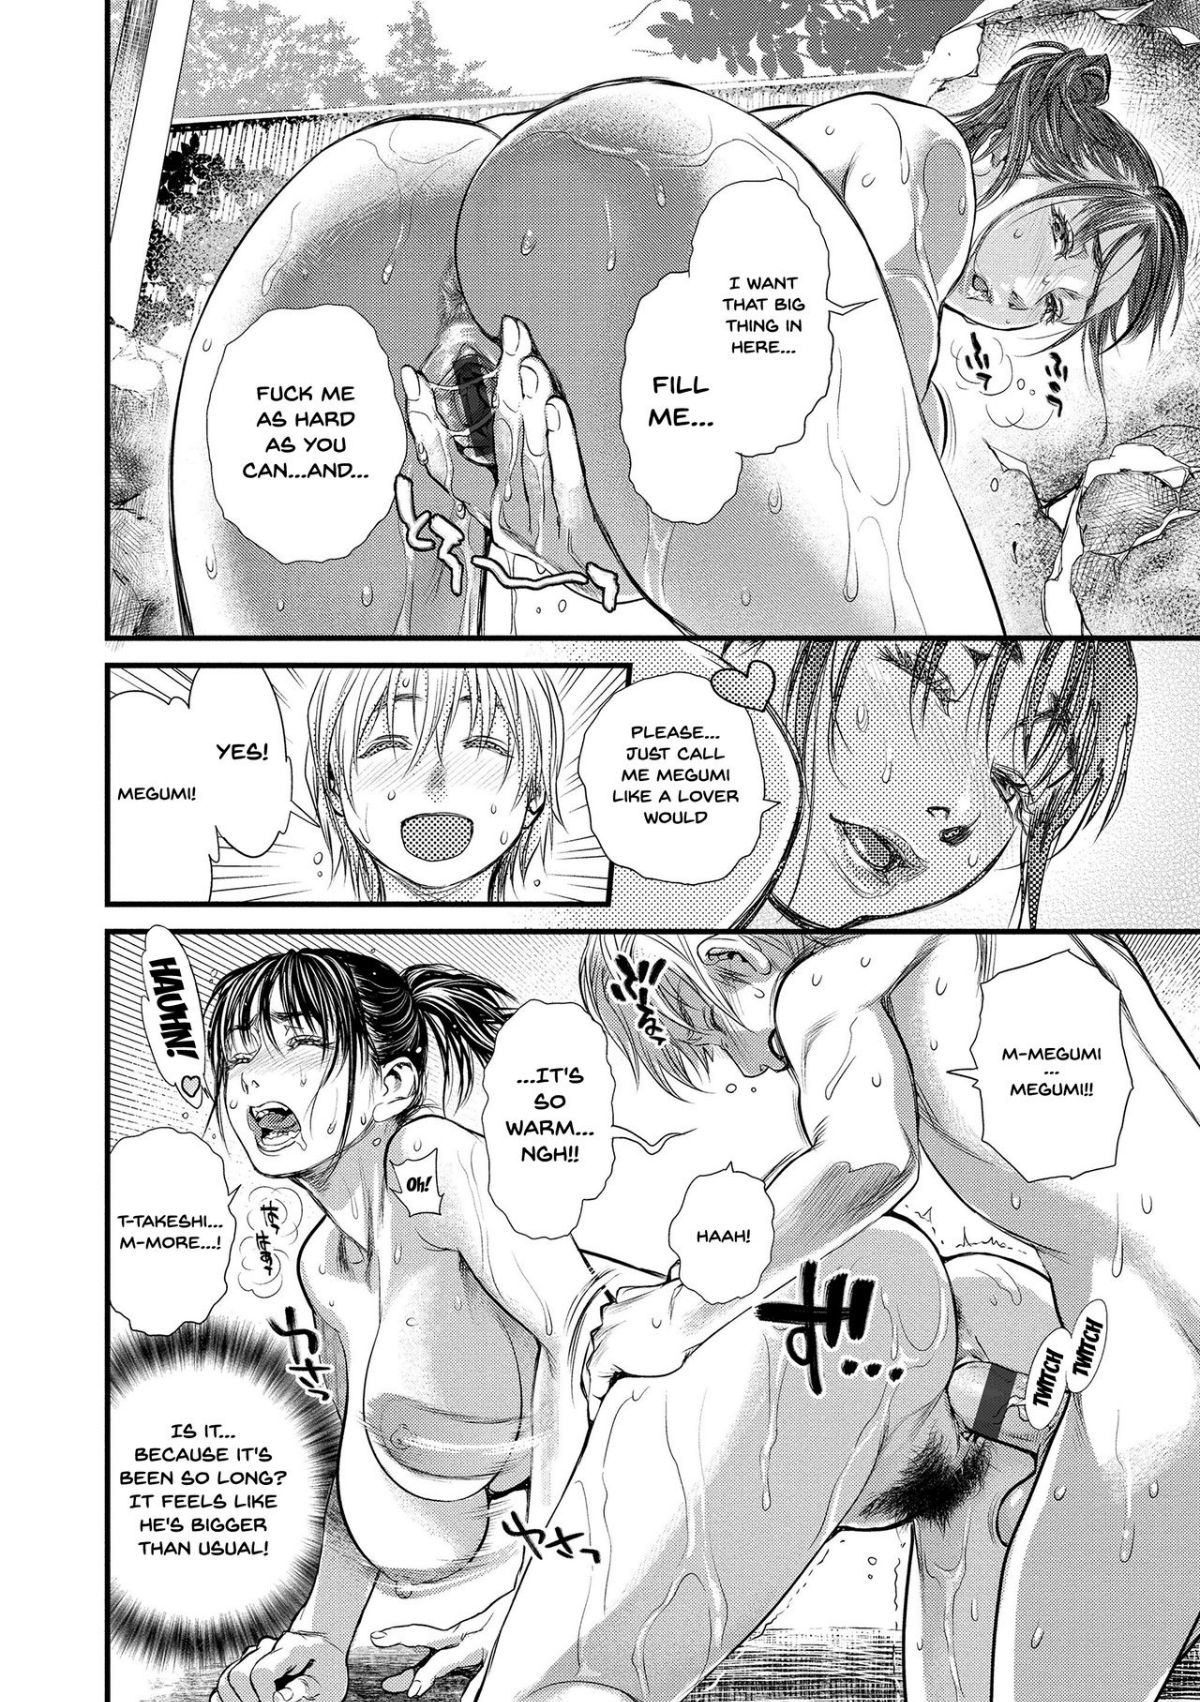 Together With My Older Cousin part 3 Hentai english 13